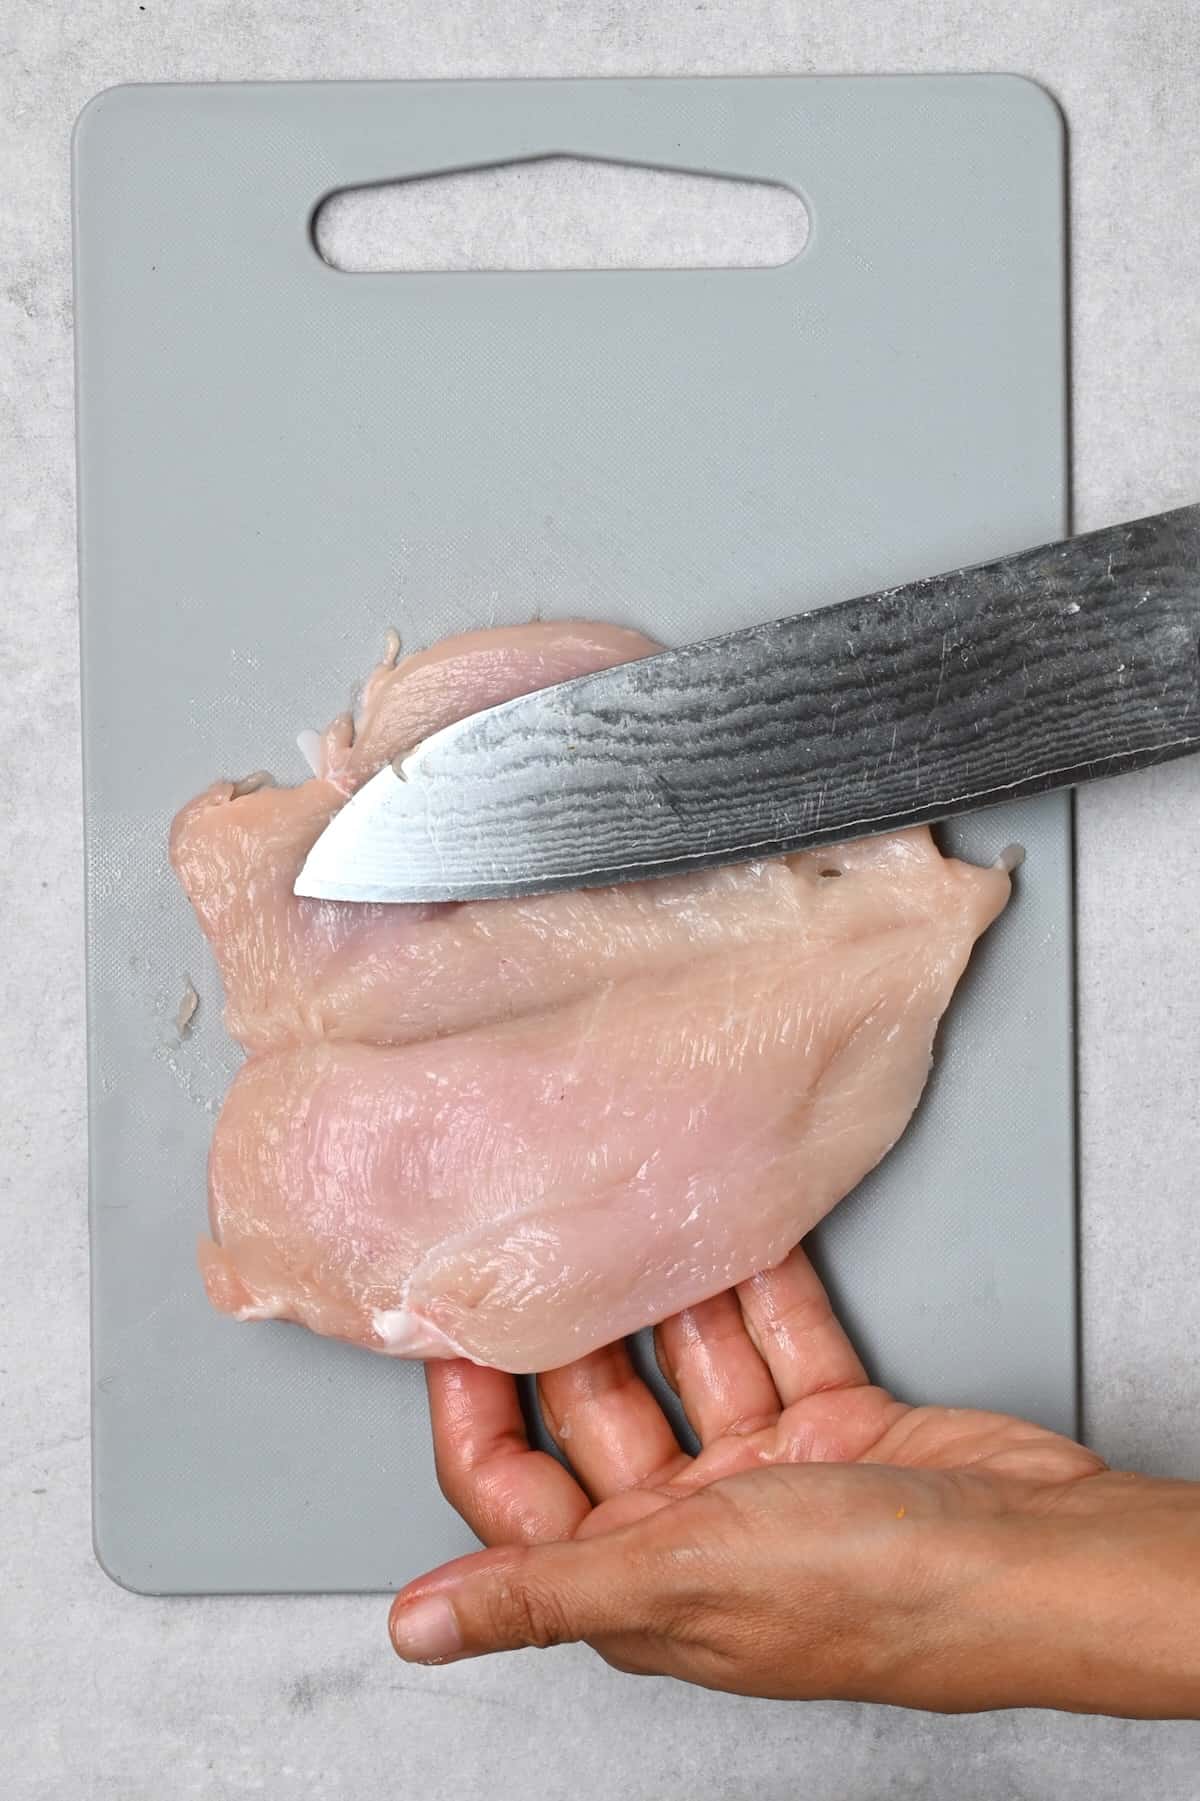 Chicken breast cut through the middle